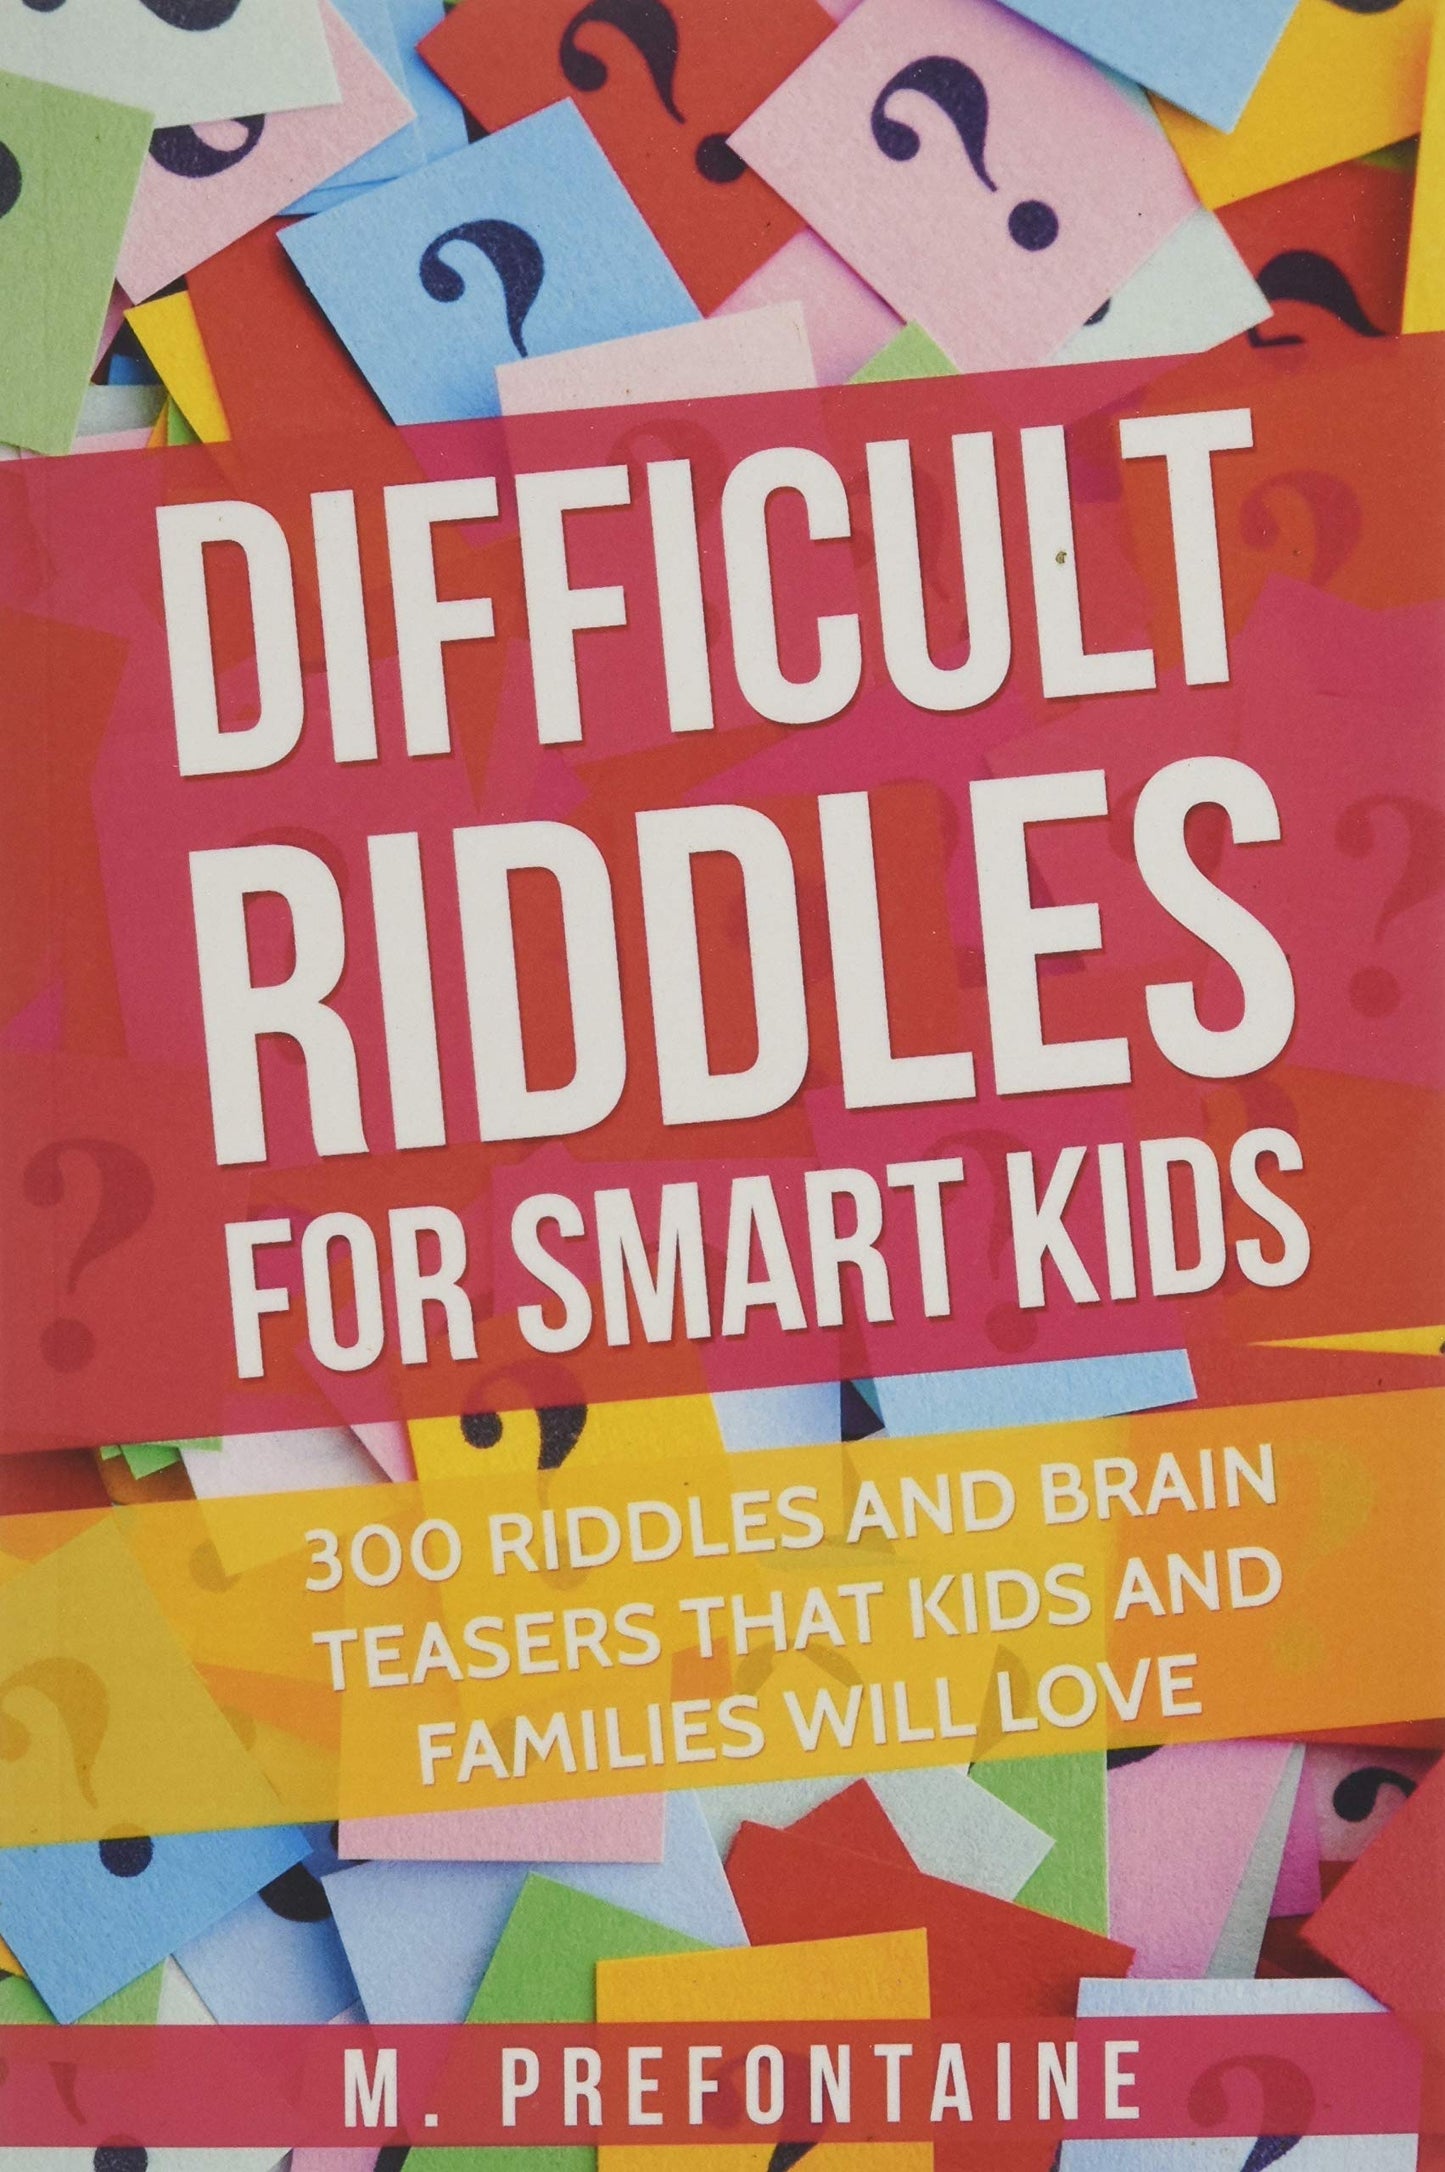 Difficult Riddles For Smart Kids: 300 Difficult Riddles And Brain Teasers Families Will Love (Thinking Books for Kids)